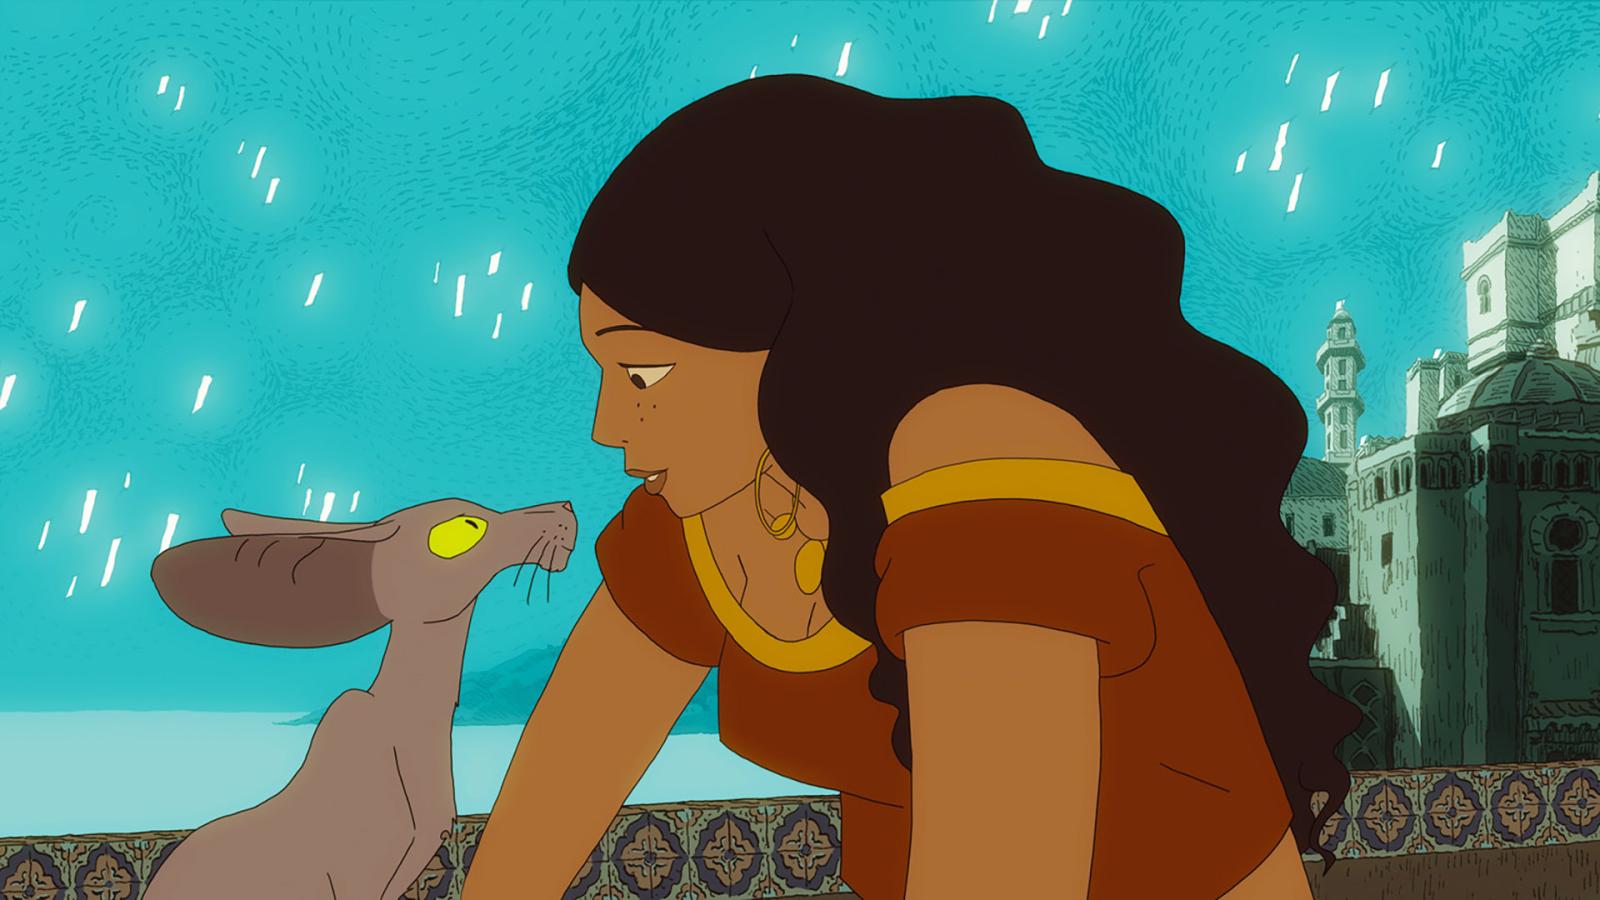 12 Underrated Animated Films Every Adult Should See - image 8